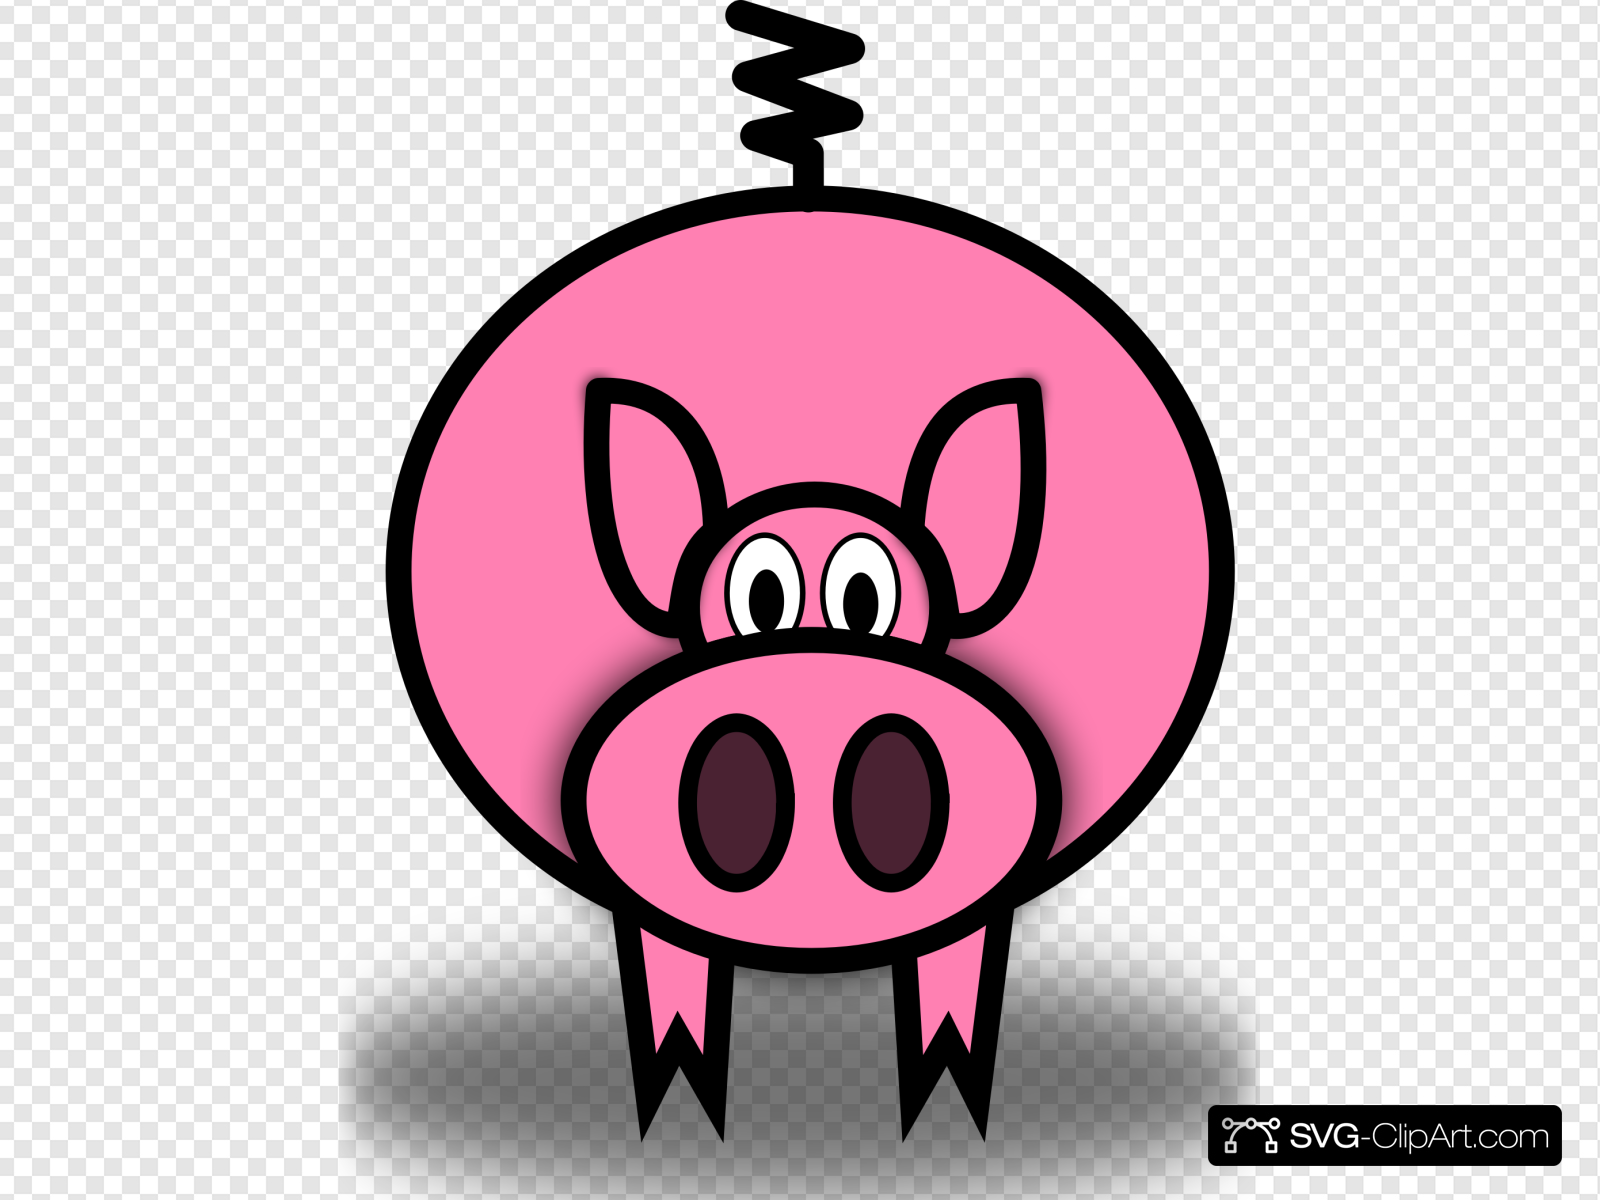 Simple Cartoon Pig Clip art, Icon and SVG